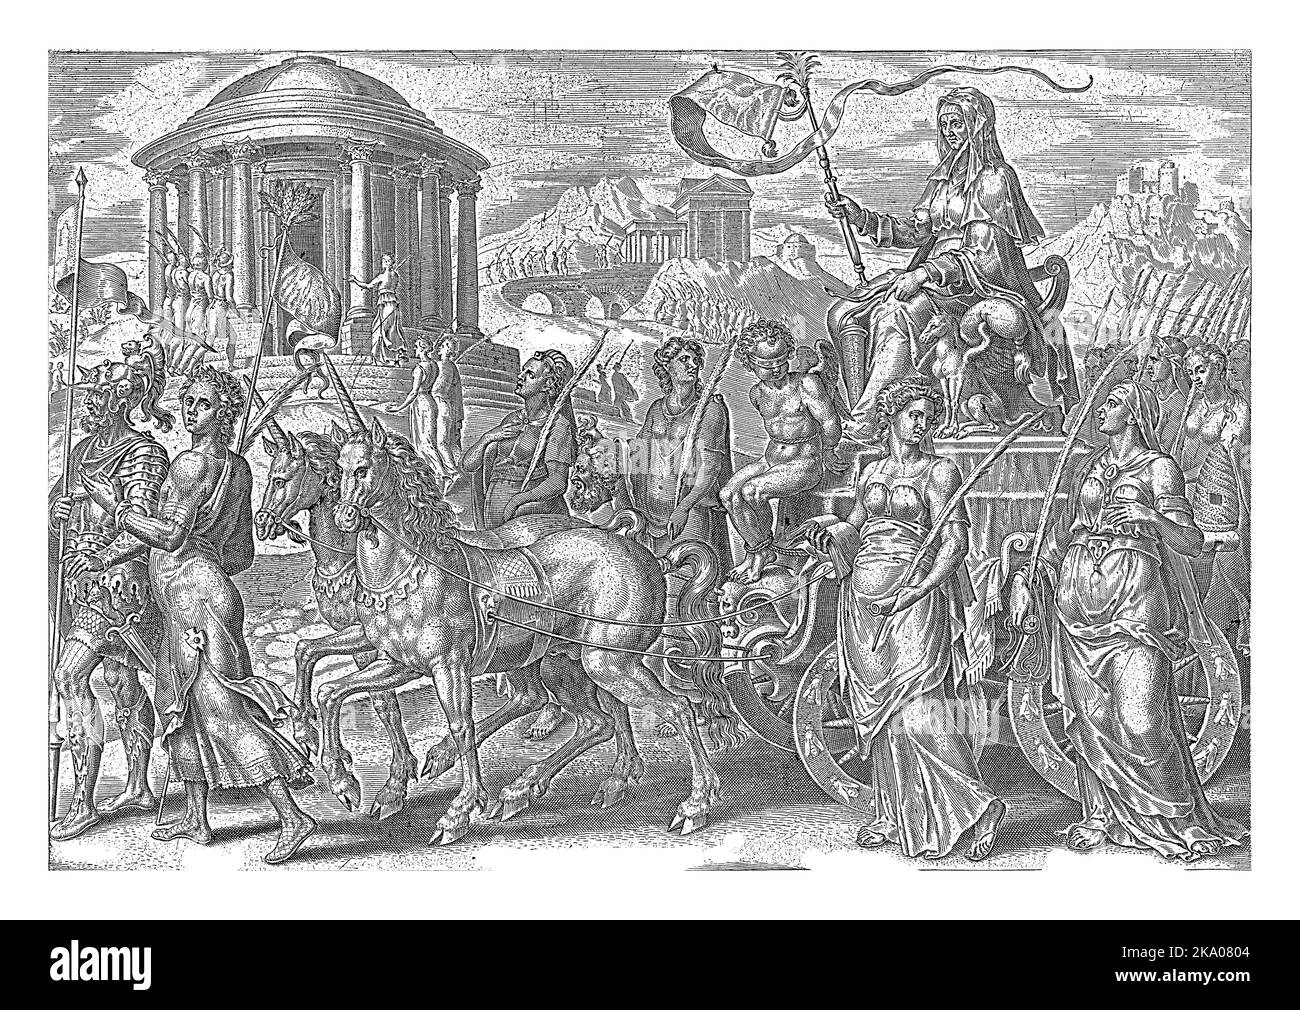 Chastity's chariot (Pudicitia), a veiled woman, is pulled by unicorns, legendary chaste animals. Cupid sits blindfolded and tied to her feet. Stock Photo